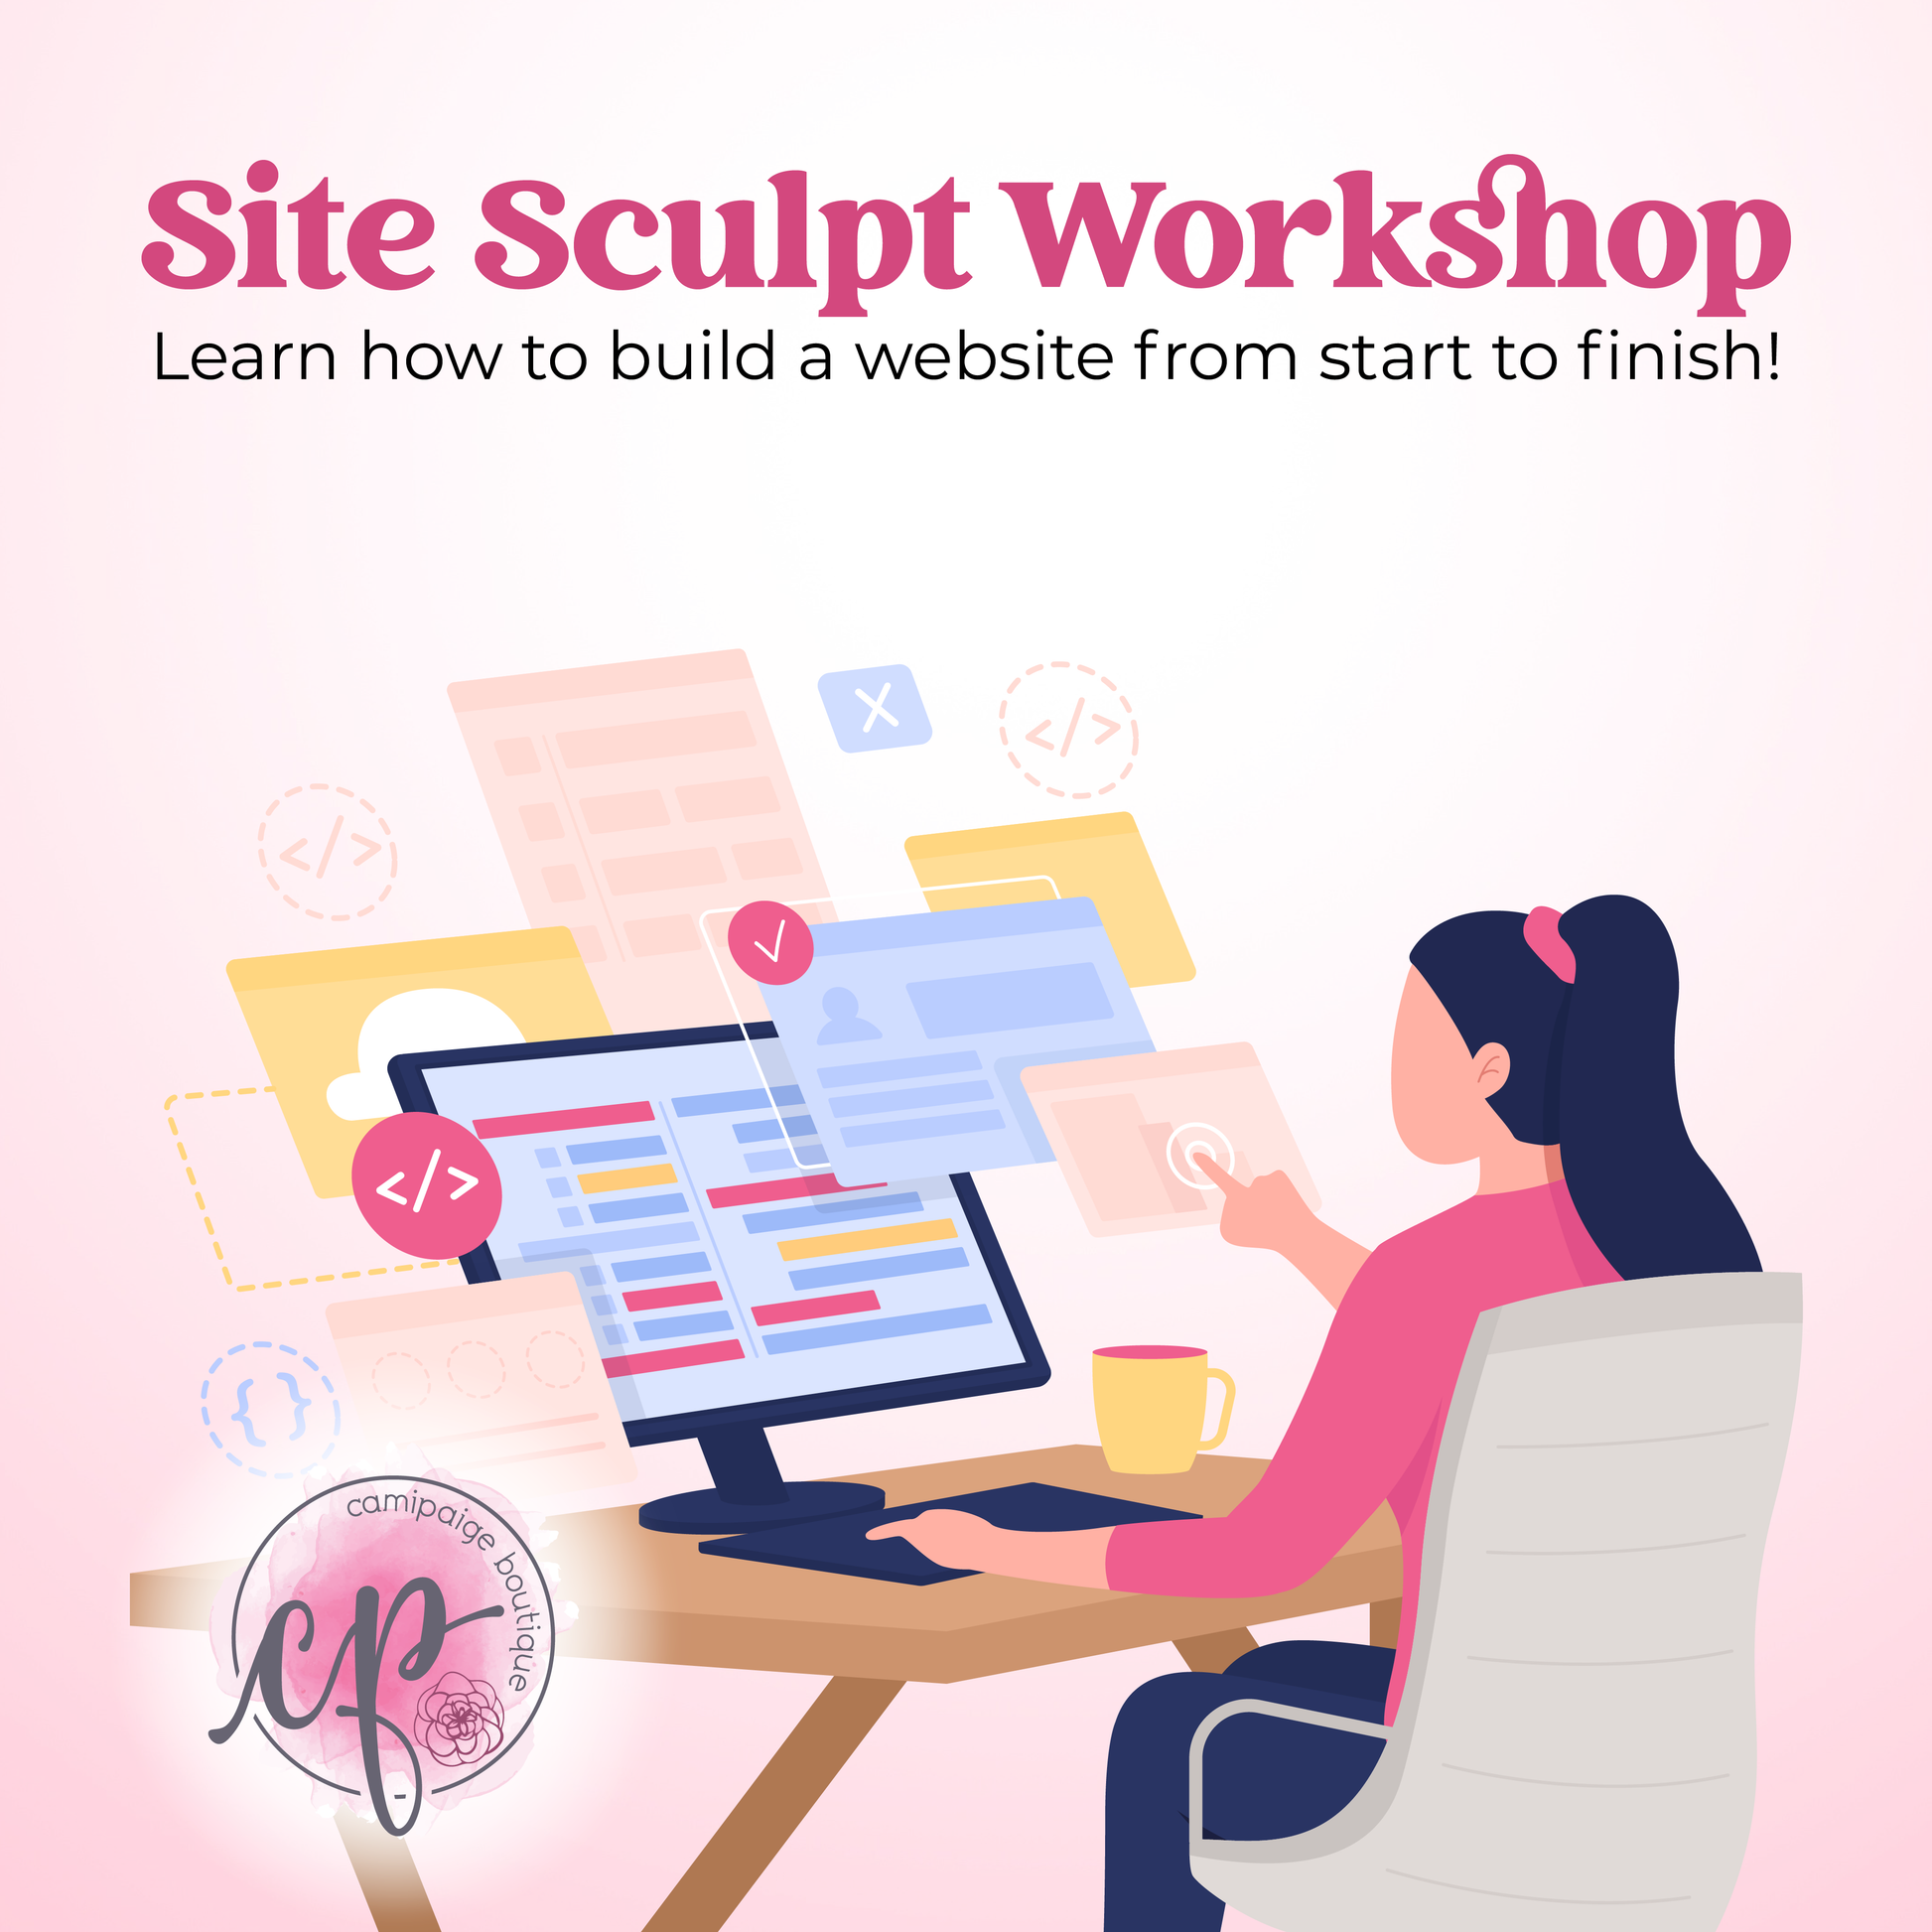 This is a workshop for small business owners to learn how to build a website from beginning to end. 